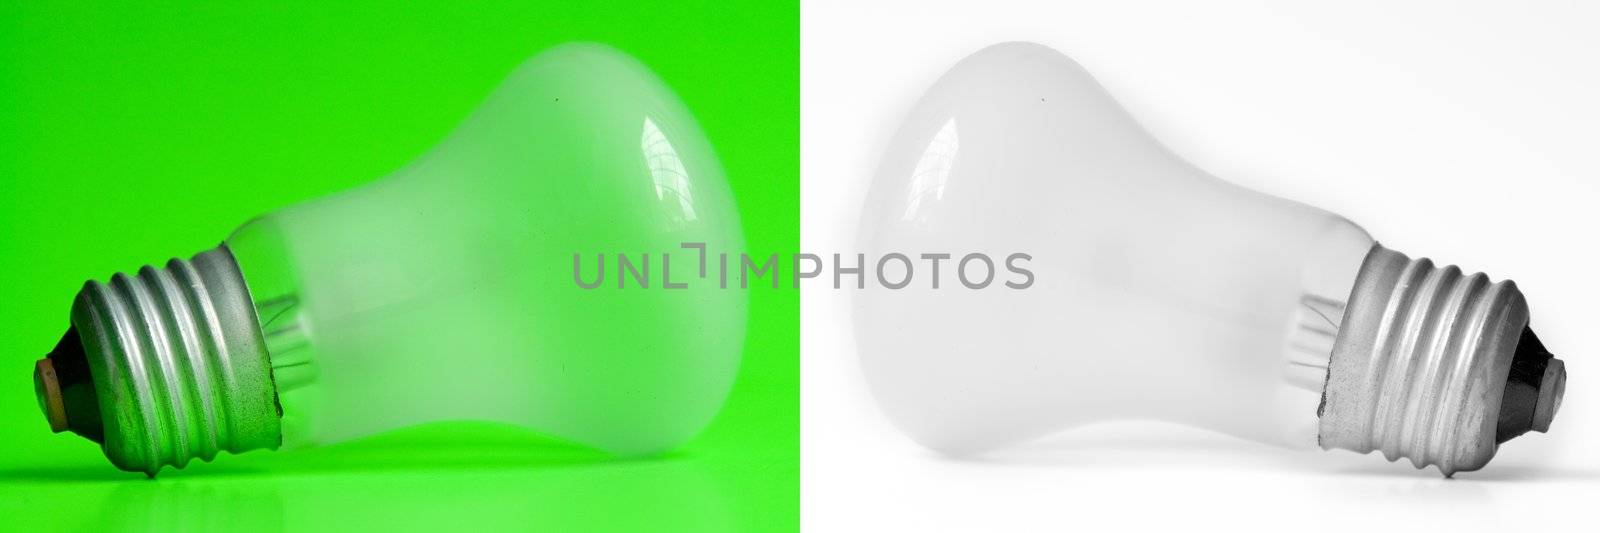 the electric bulb on a green/white background